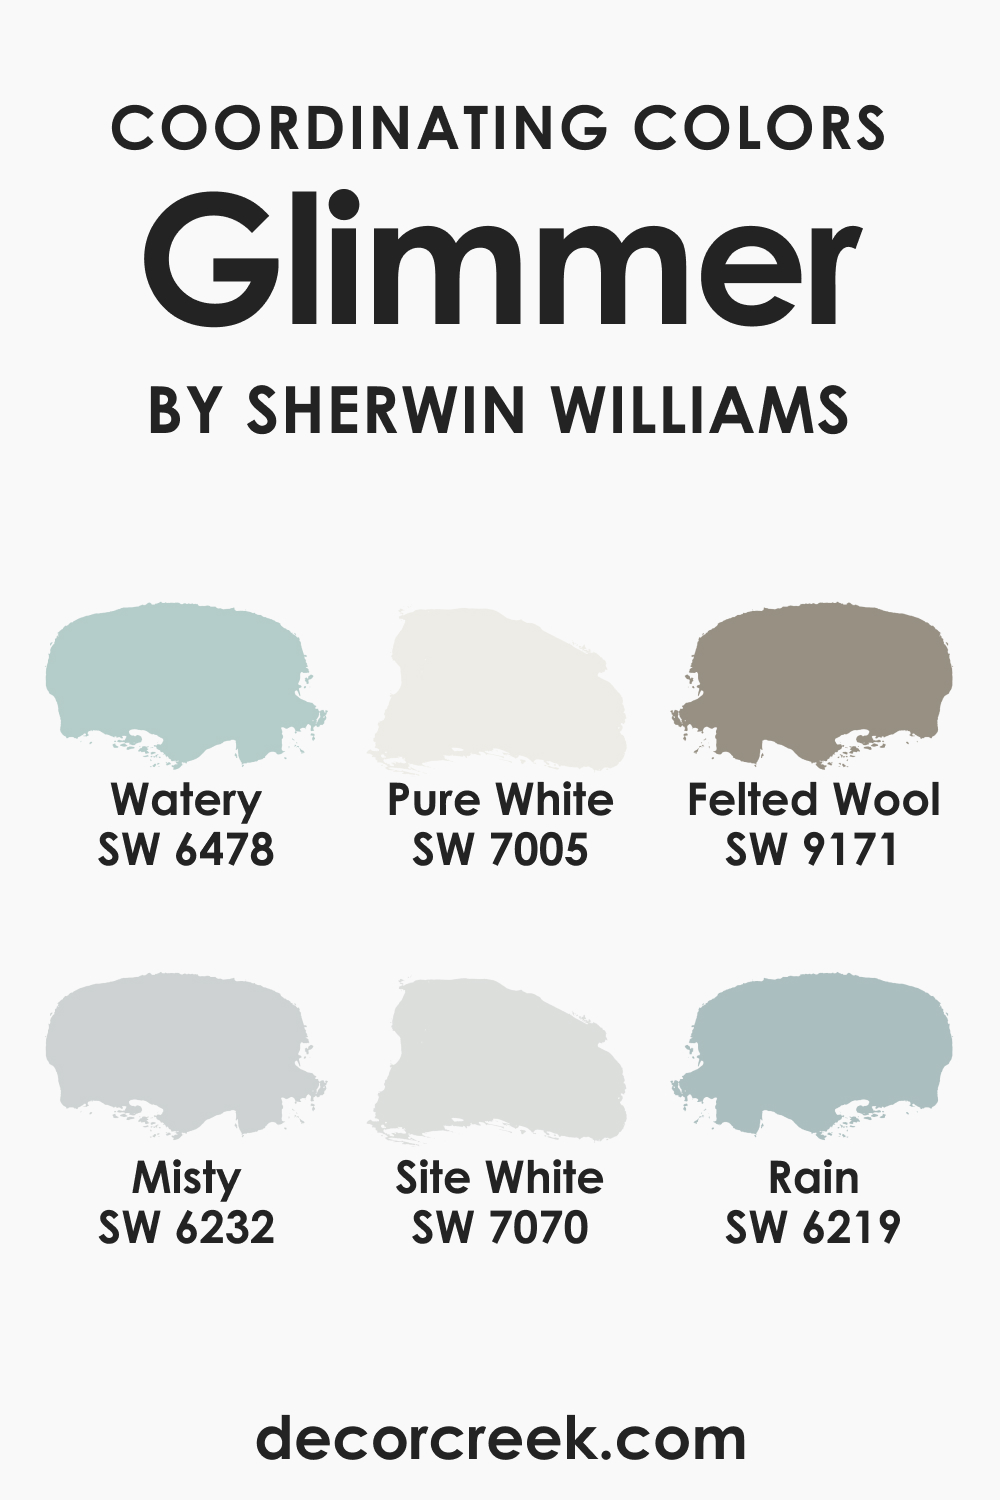 Coordinating Colors of SW 6476 Glimmer